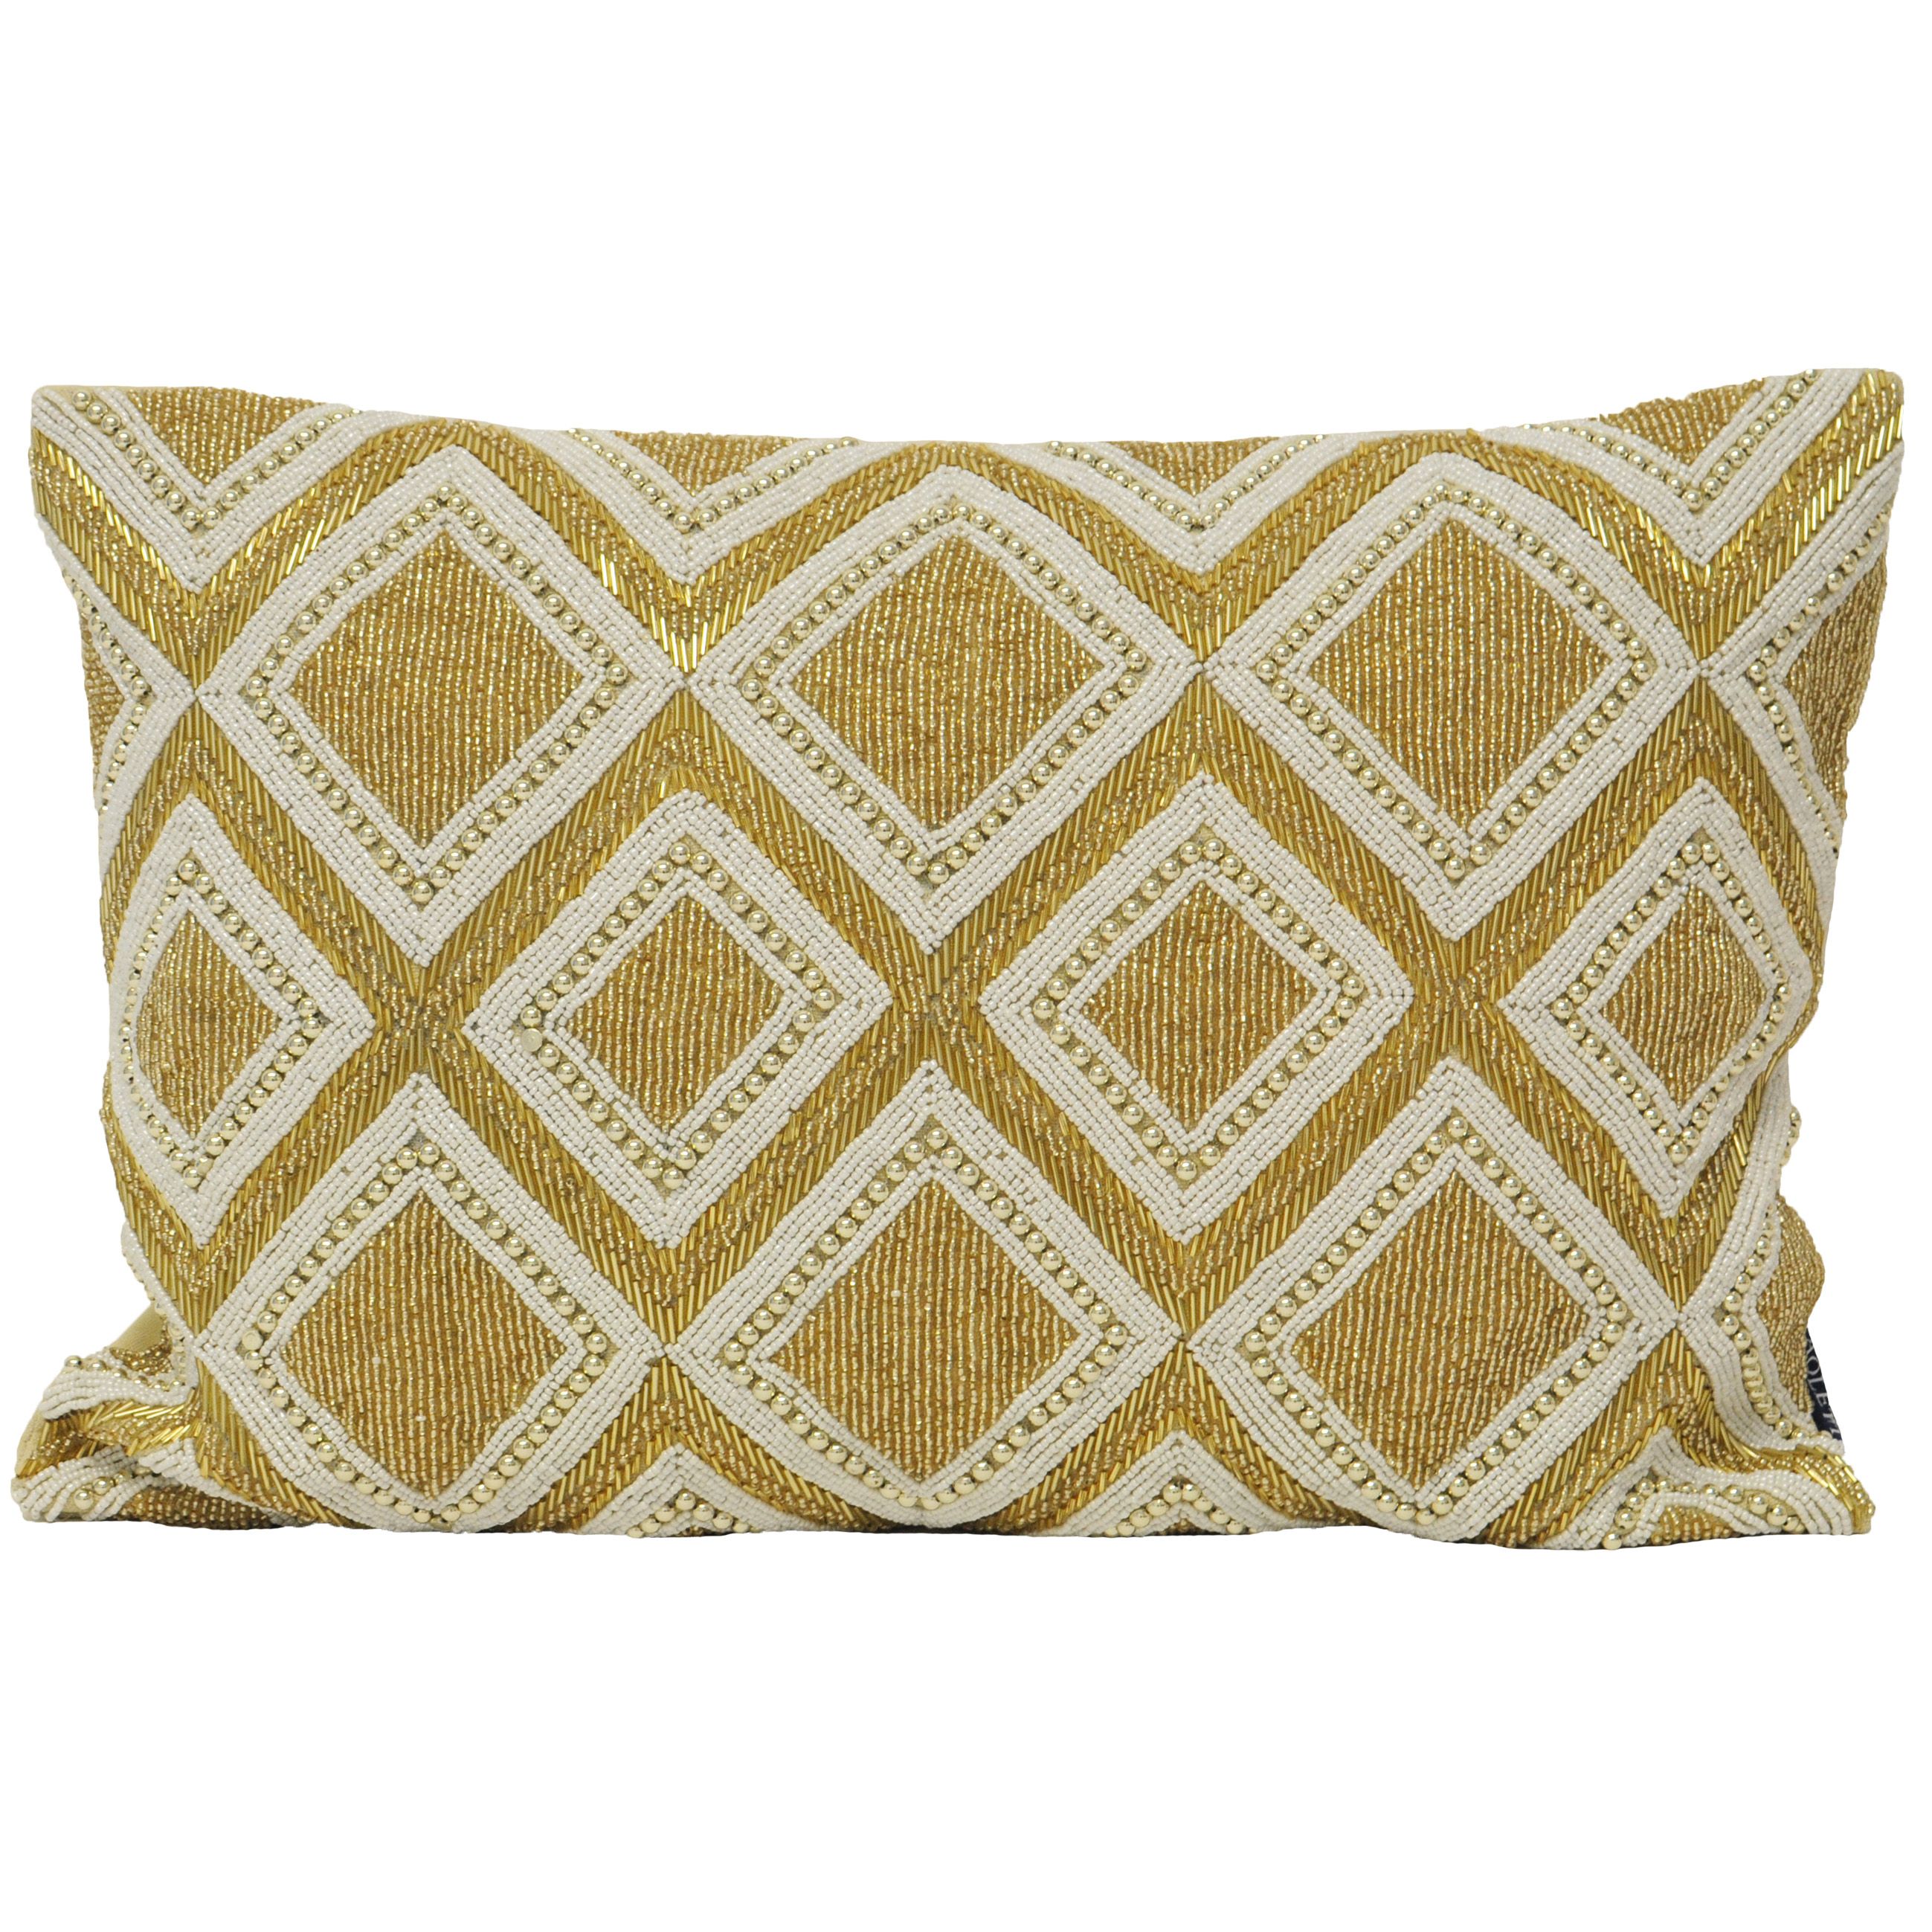 Add some texture to your interior with the Kenitra beaded cushion. Complete with a geometric design - this cushion is the perfect element for an eye-catching added element to your décor.